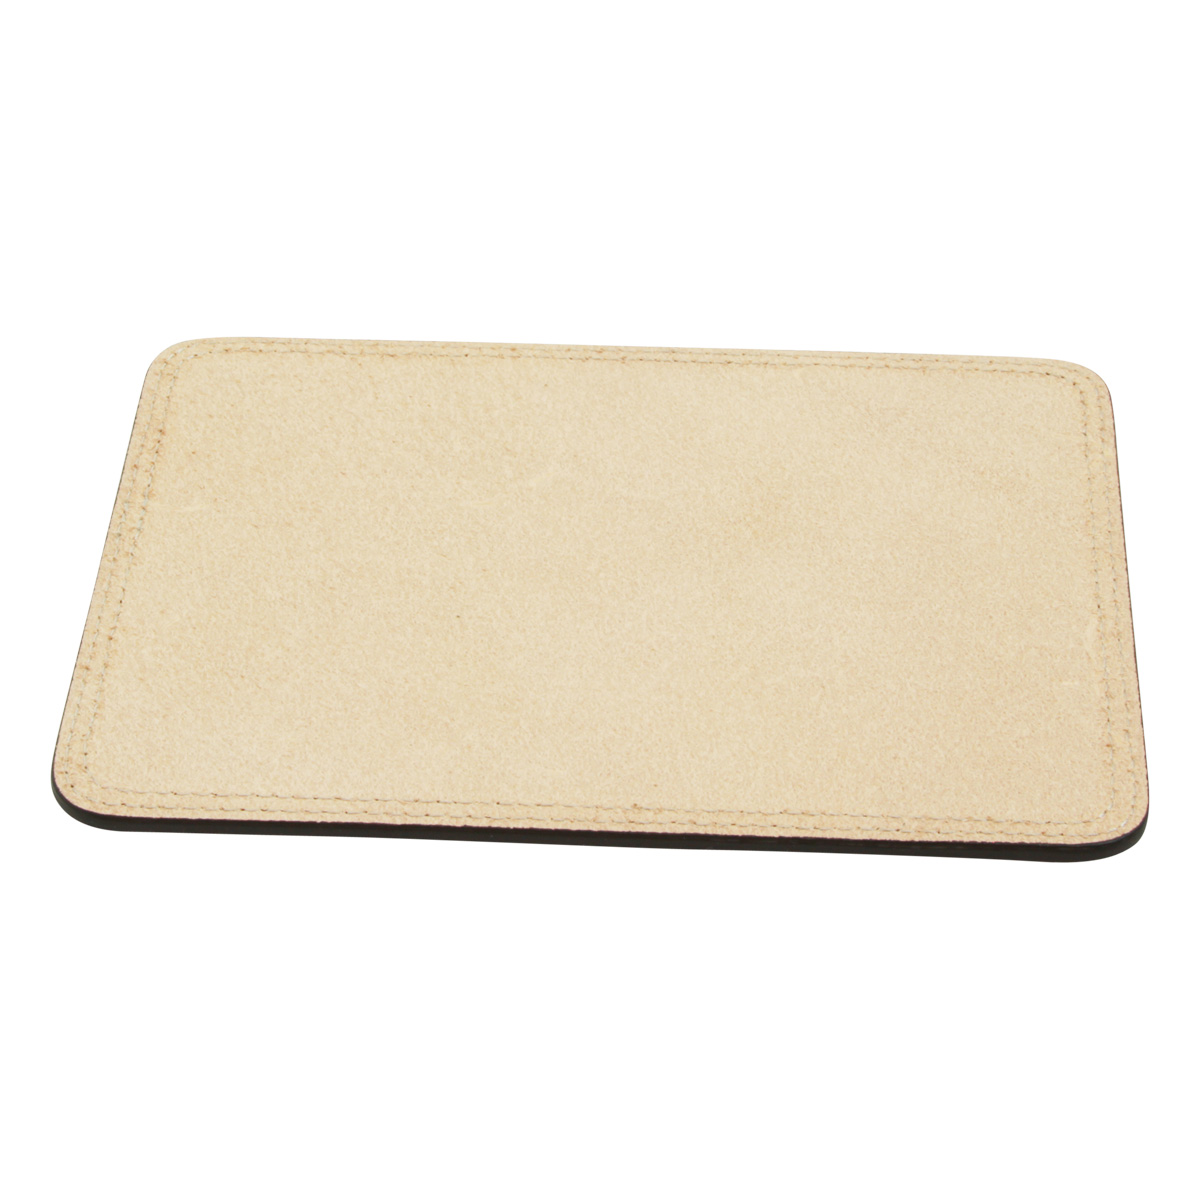 Leather mouse pad  | 761089CB | EURO | Old Angler Firenze